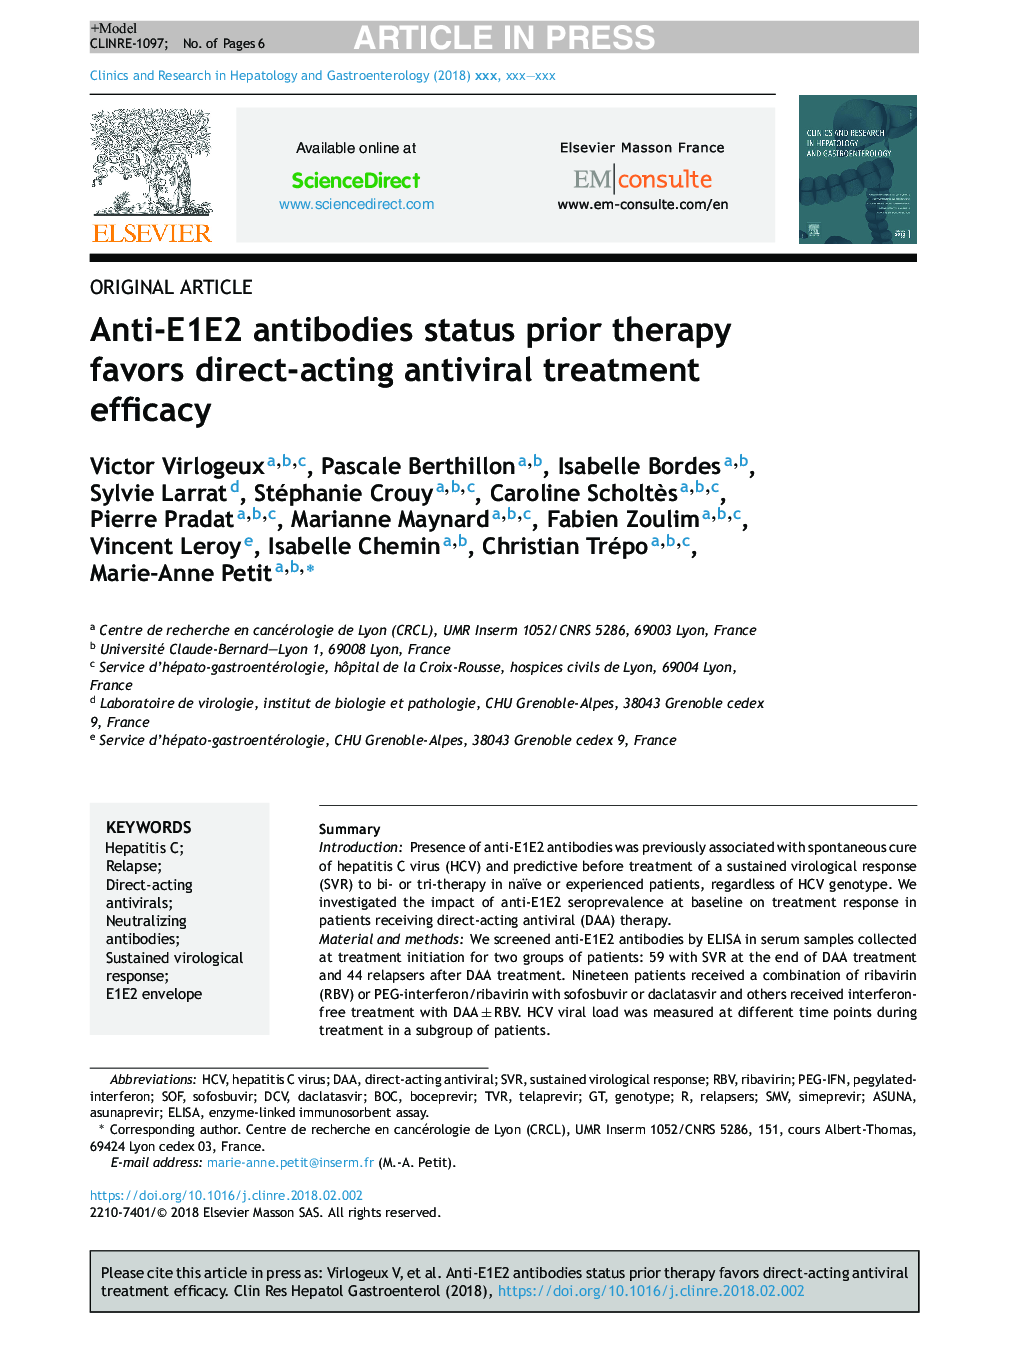 Anti-E1E2 antibodies status prior therapy favors direct-acting antiviral treatment efficacy